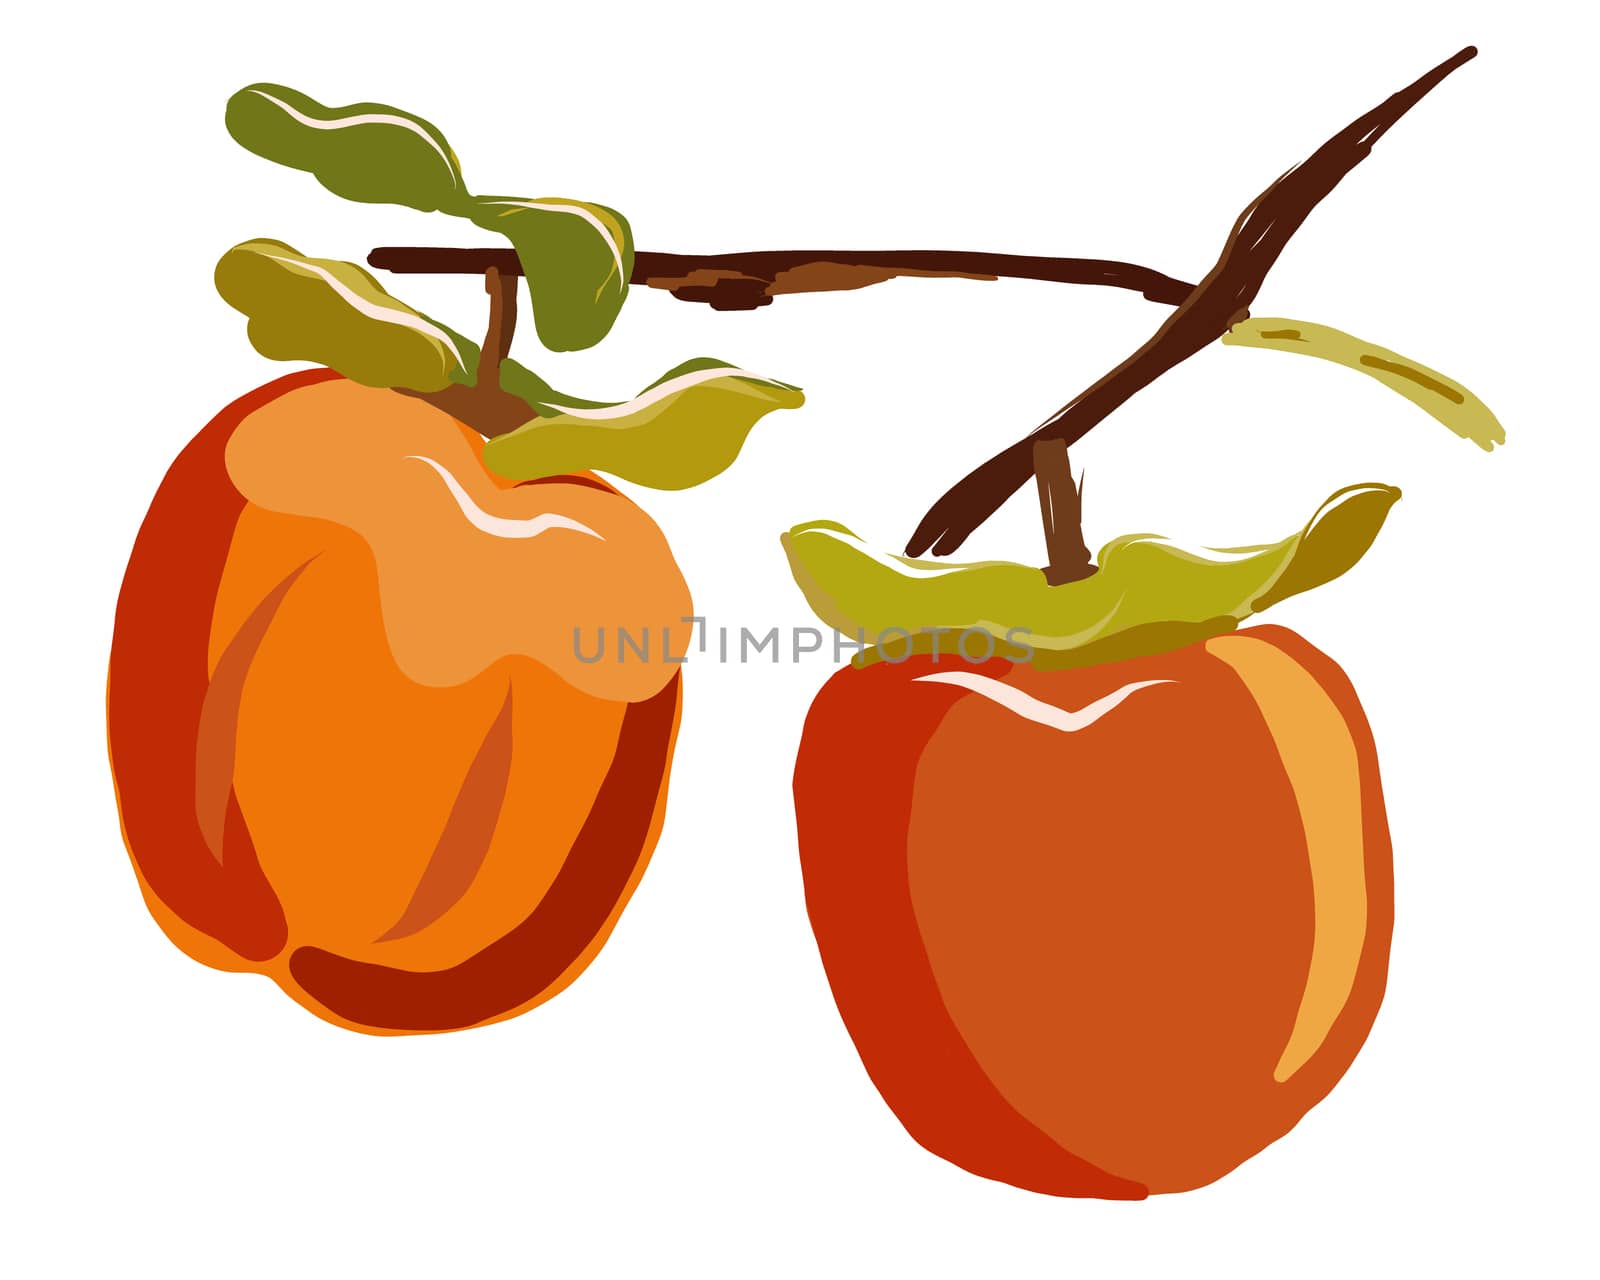 Sharon fruit branch with leaves isolated on white background vector illustration. Orange persimmon whole and cut for design, banner, menu, poster, apparel.